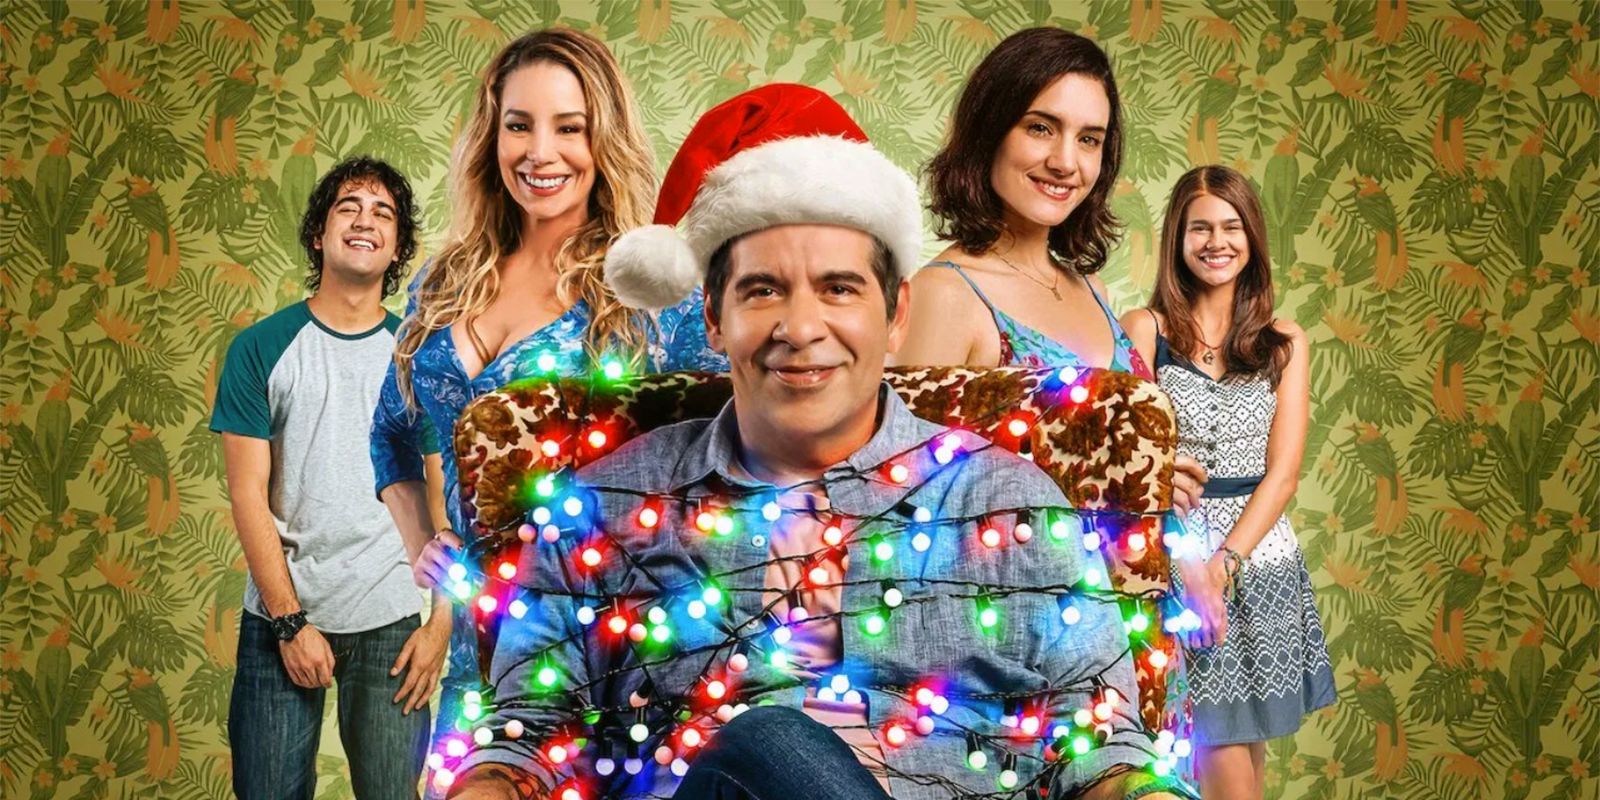 Jorge is wrapped in Christmas lights in Just Another Christmas